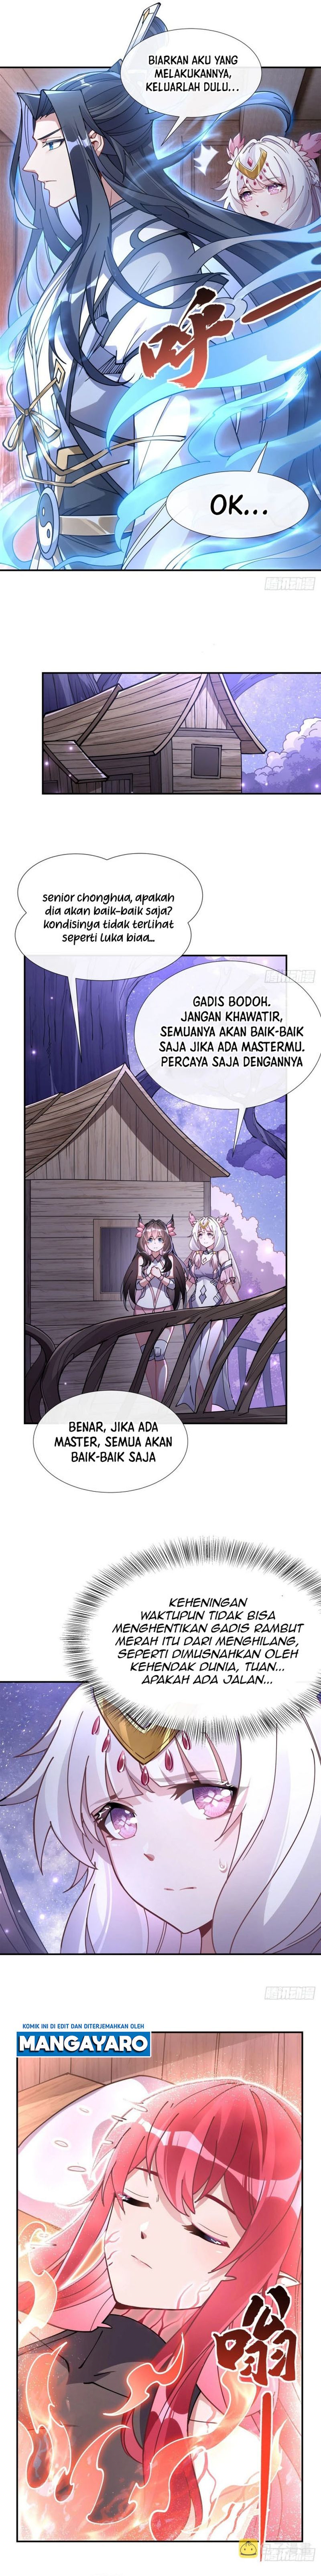 Dilarang COPAS - situs resmi www.mangacanblog.com - Komik my female apprentices are all big shots from the future 146 - chapter 146 147 Indonesia my female apprentices are all big shots from the future 146 - chapter 146 Terbaru 2|Baca Manga Komik Indonesia|Mangacan